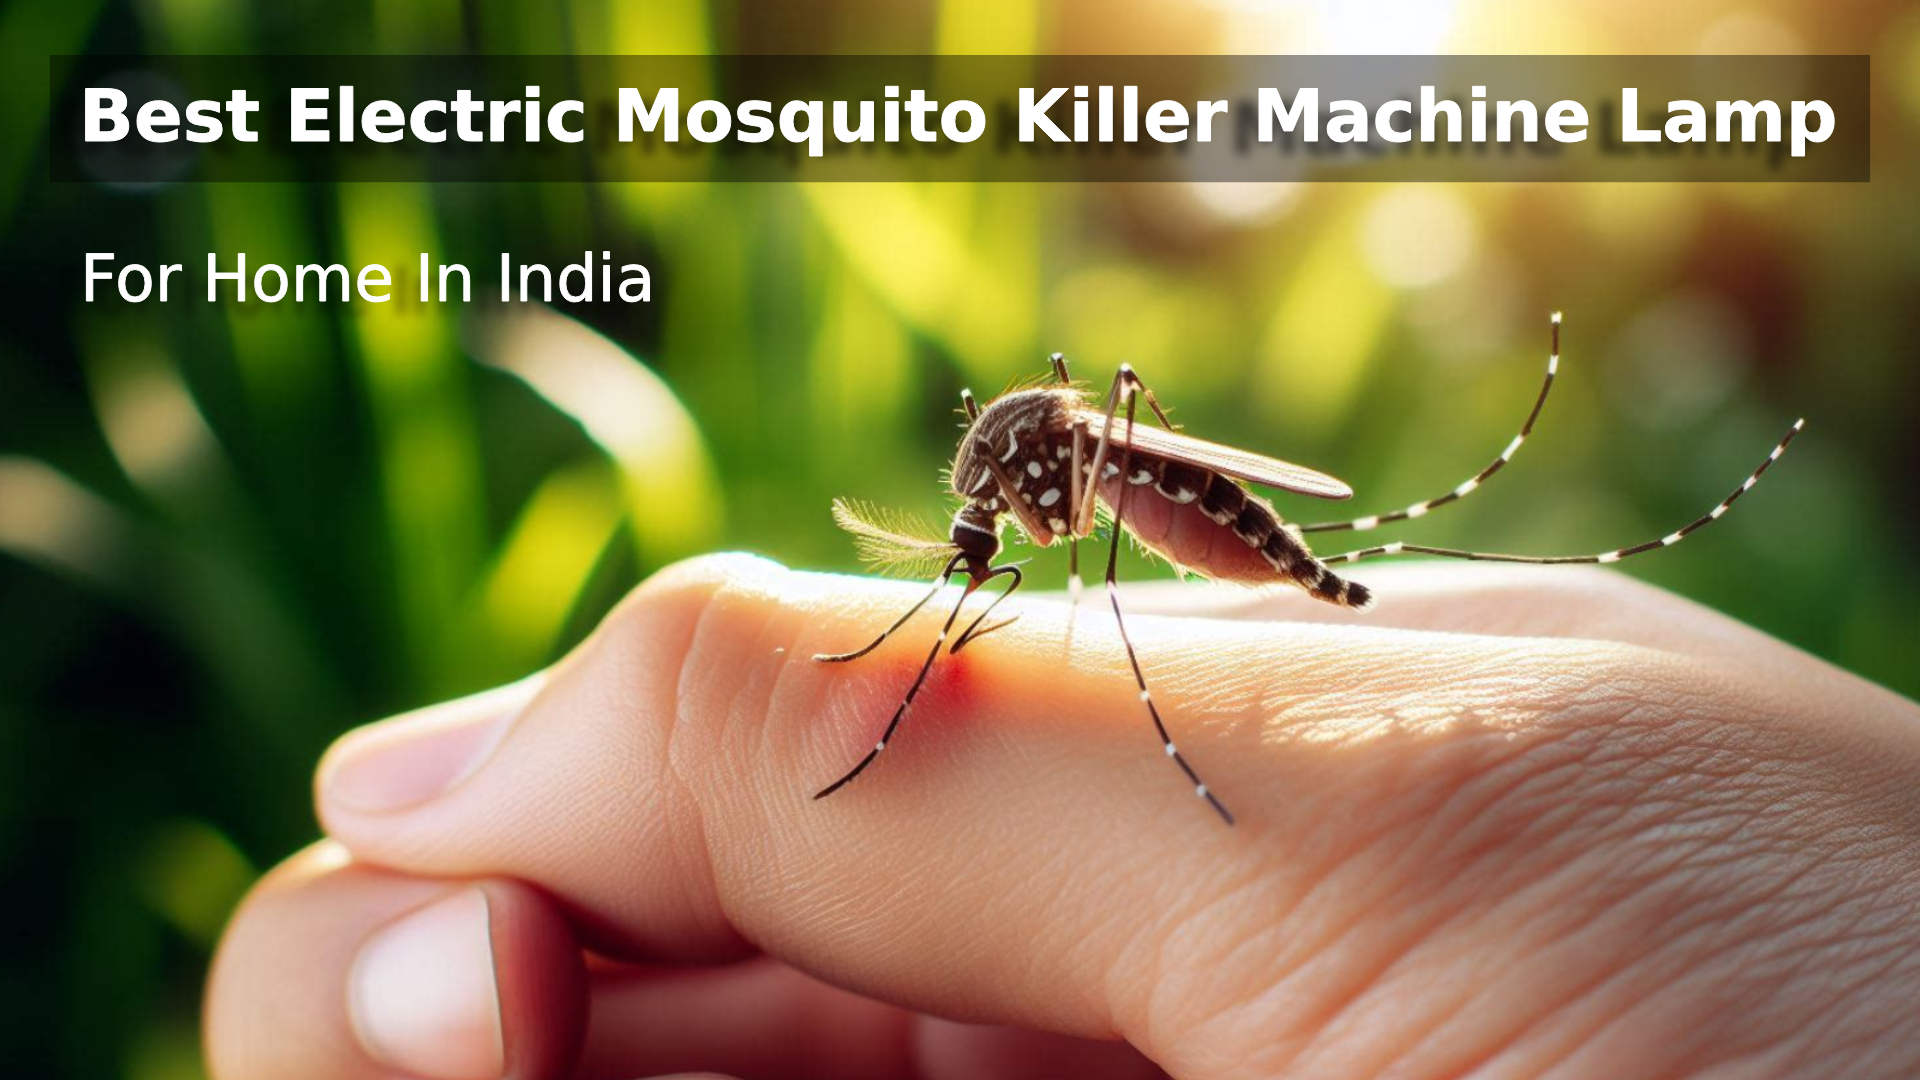 Best Electric Mosquito Killer Machine Lamp For Home In India